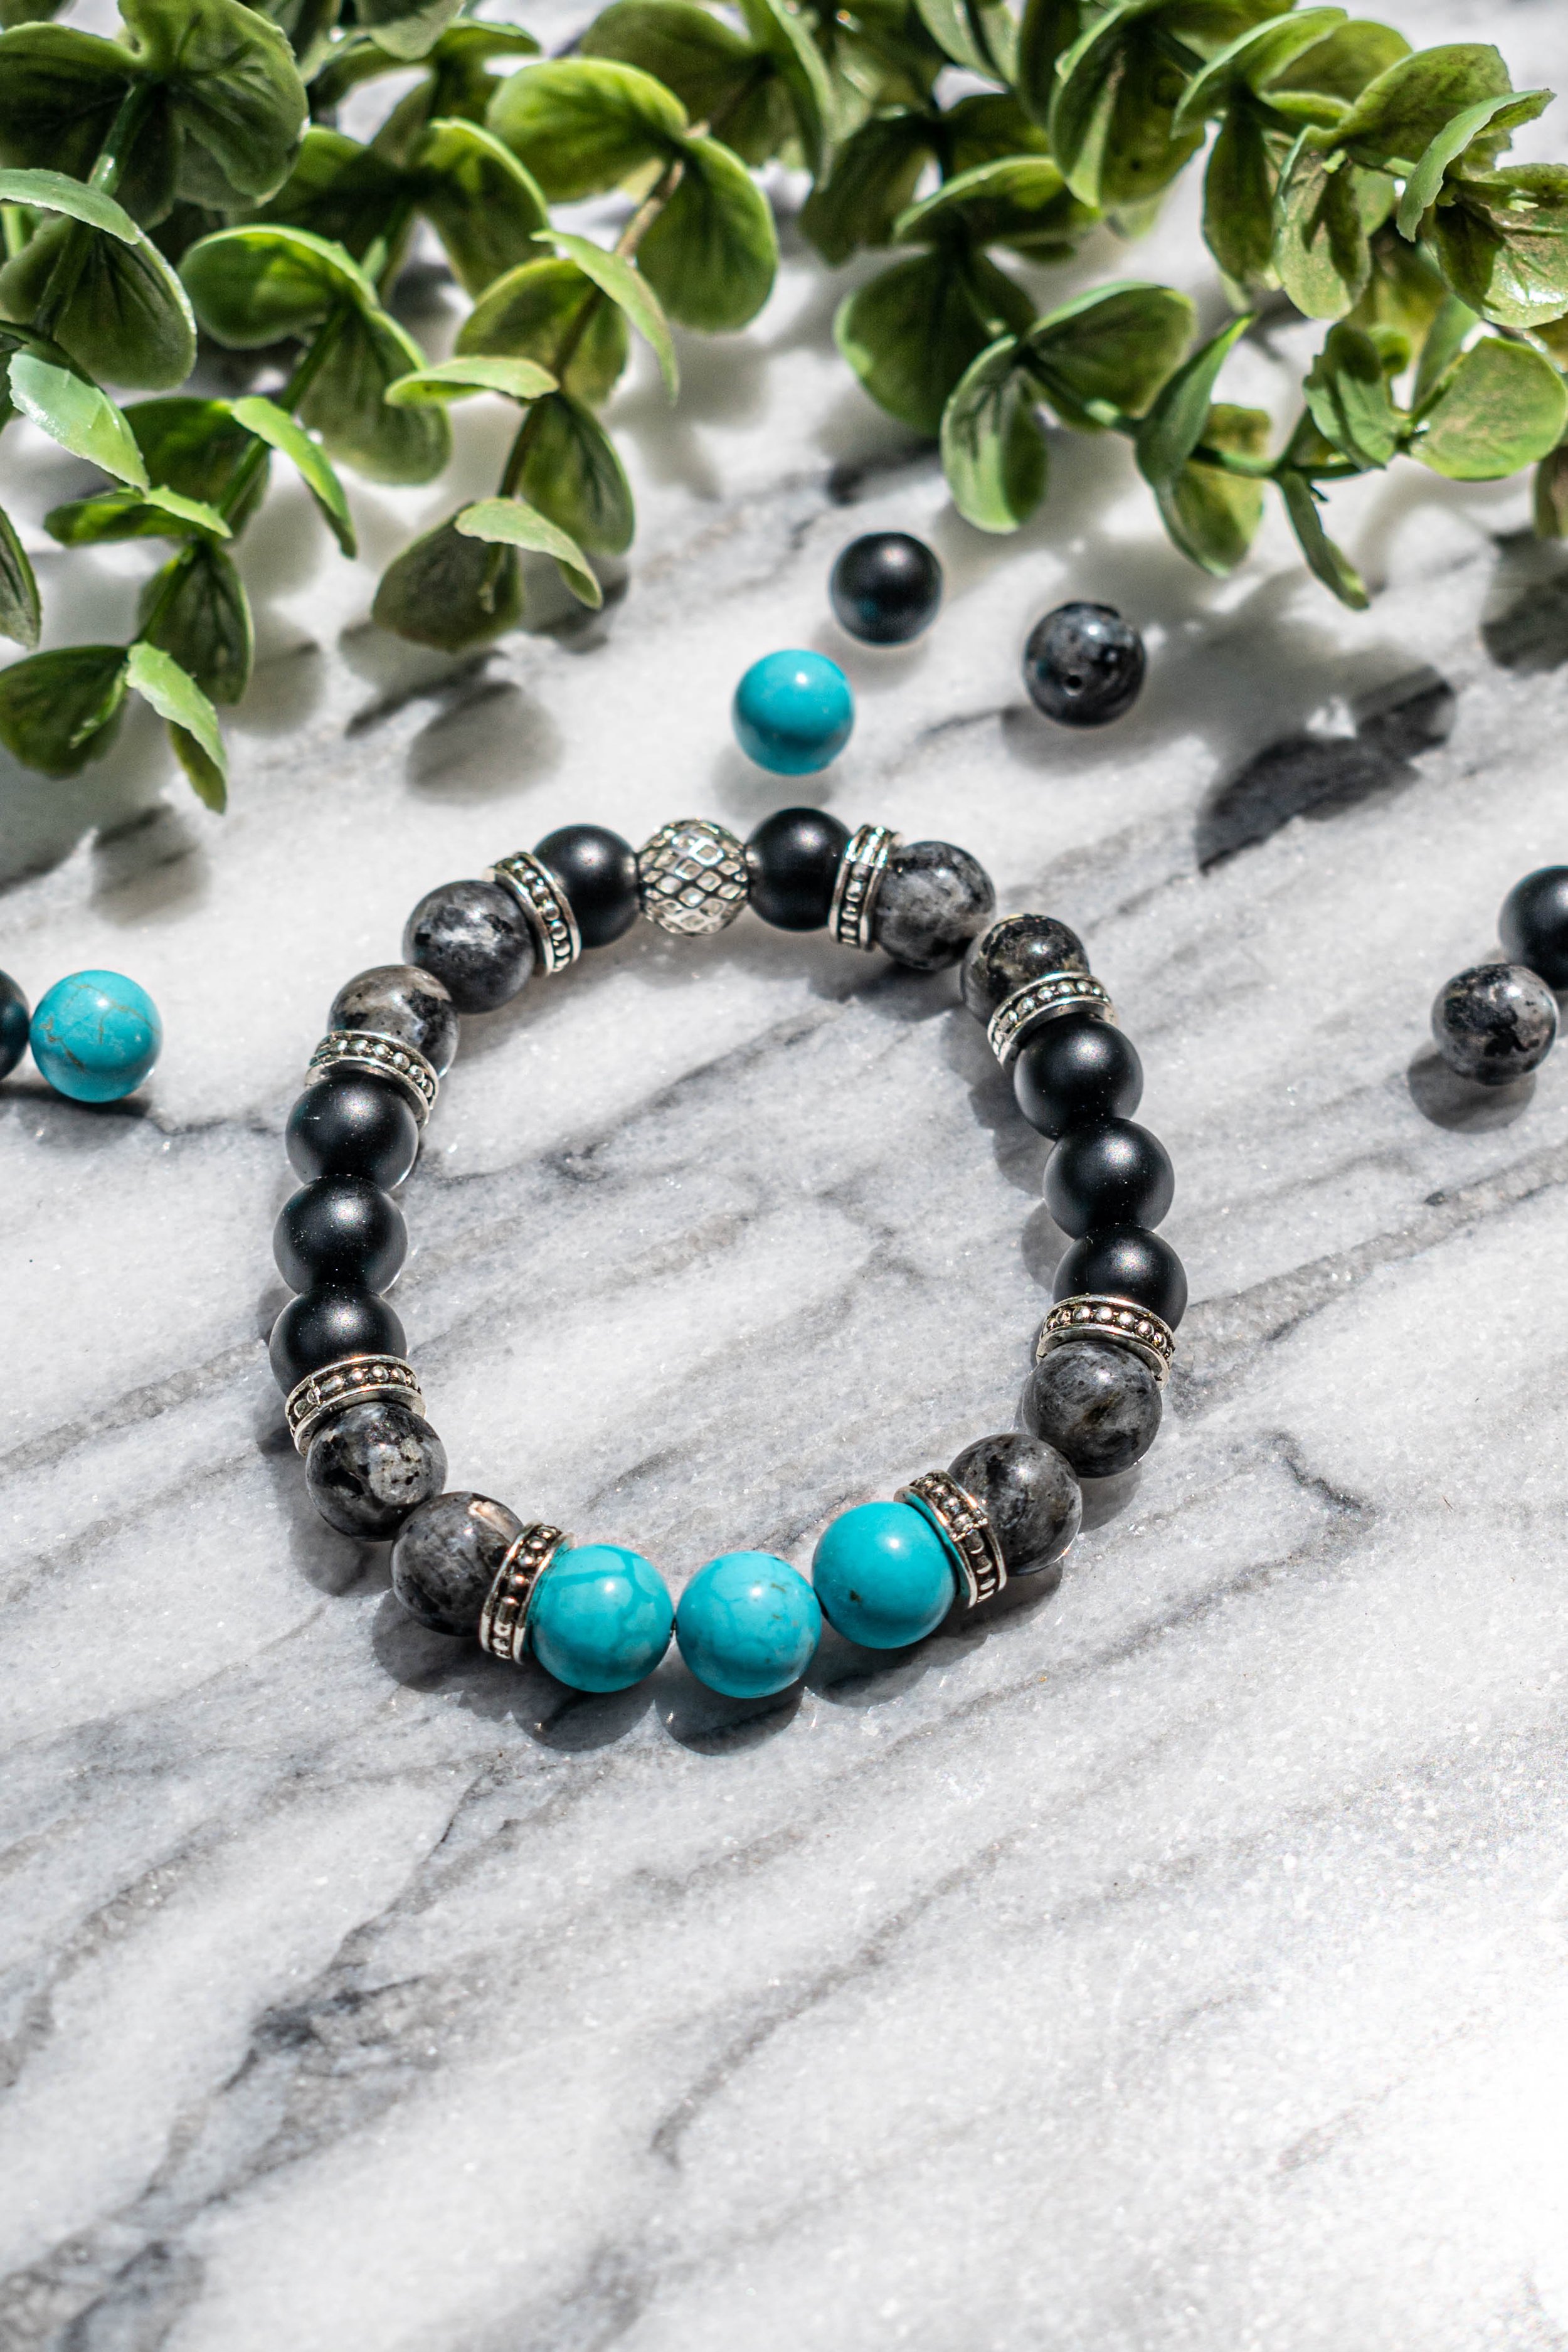 Energy Mala Bead Bracelets: Unique Meaning and variety | Mala beads bracelet,  Mala beads, Beads